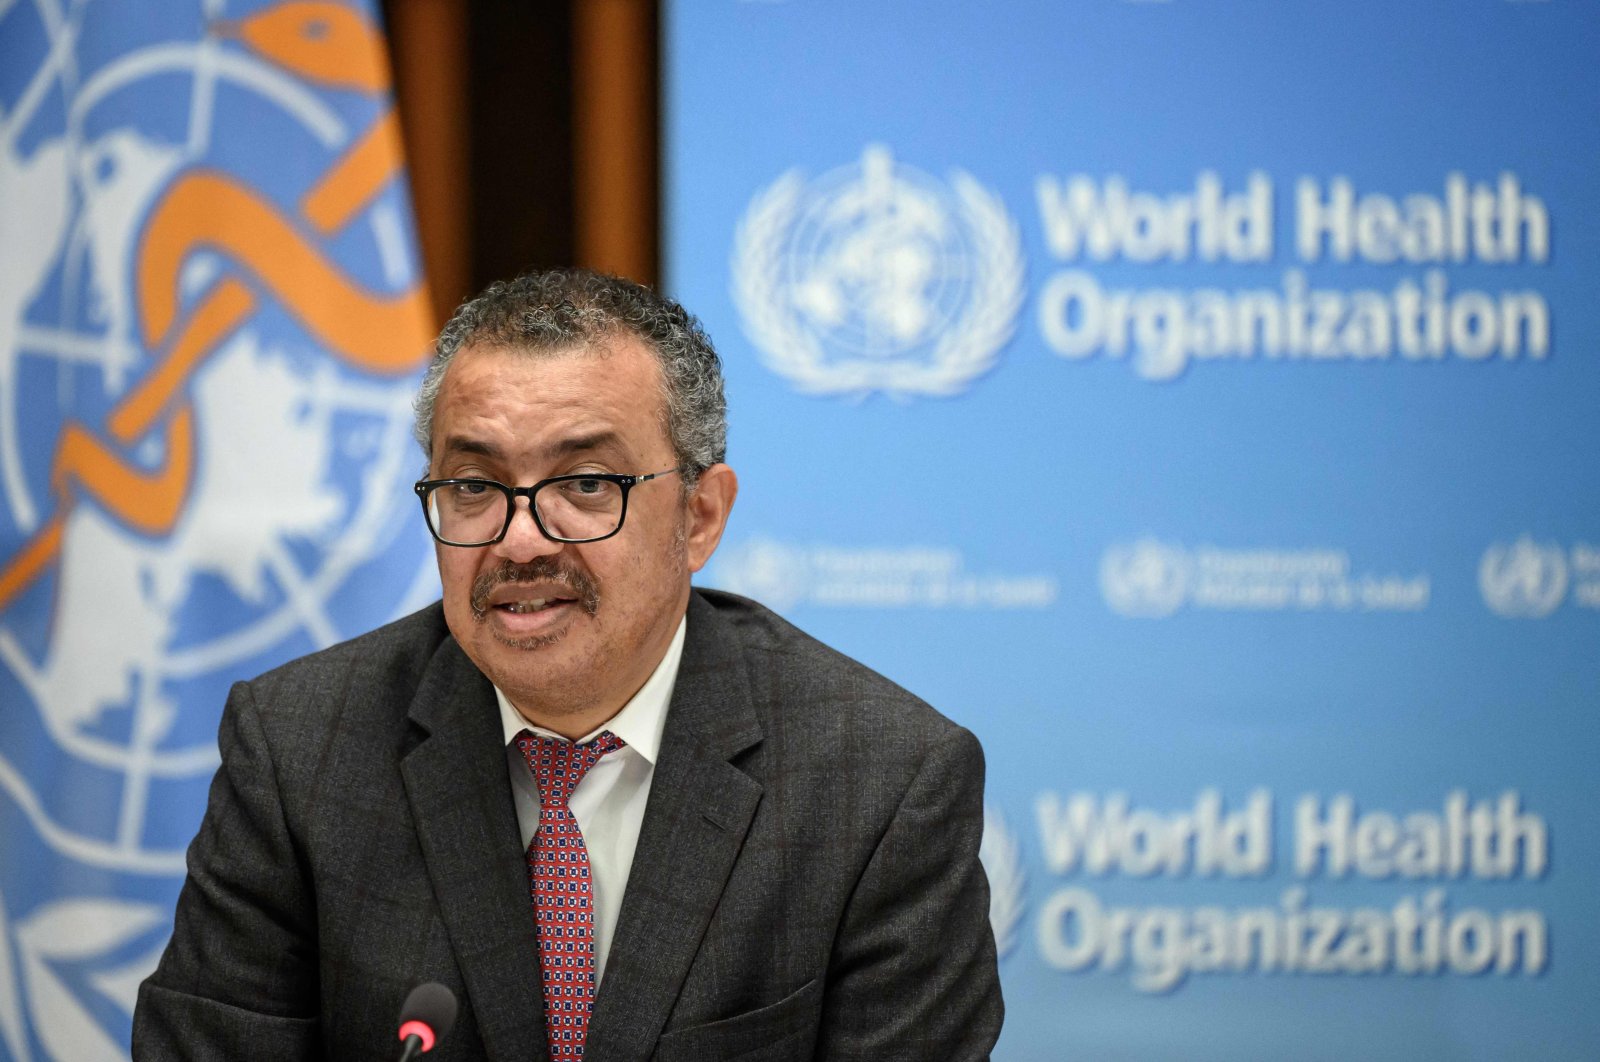 World Health Organization (WHO) Director-General Tedros Adhanom Ghebreyesus delivers a speech on the partnership with Qatar ahead of FIFA Football World Cup 2022 at the WHO headquarters in Geneva, Switzerland, Oct. 18, 2021. (AFP Photo)